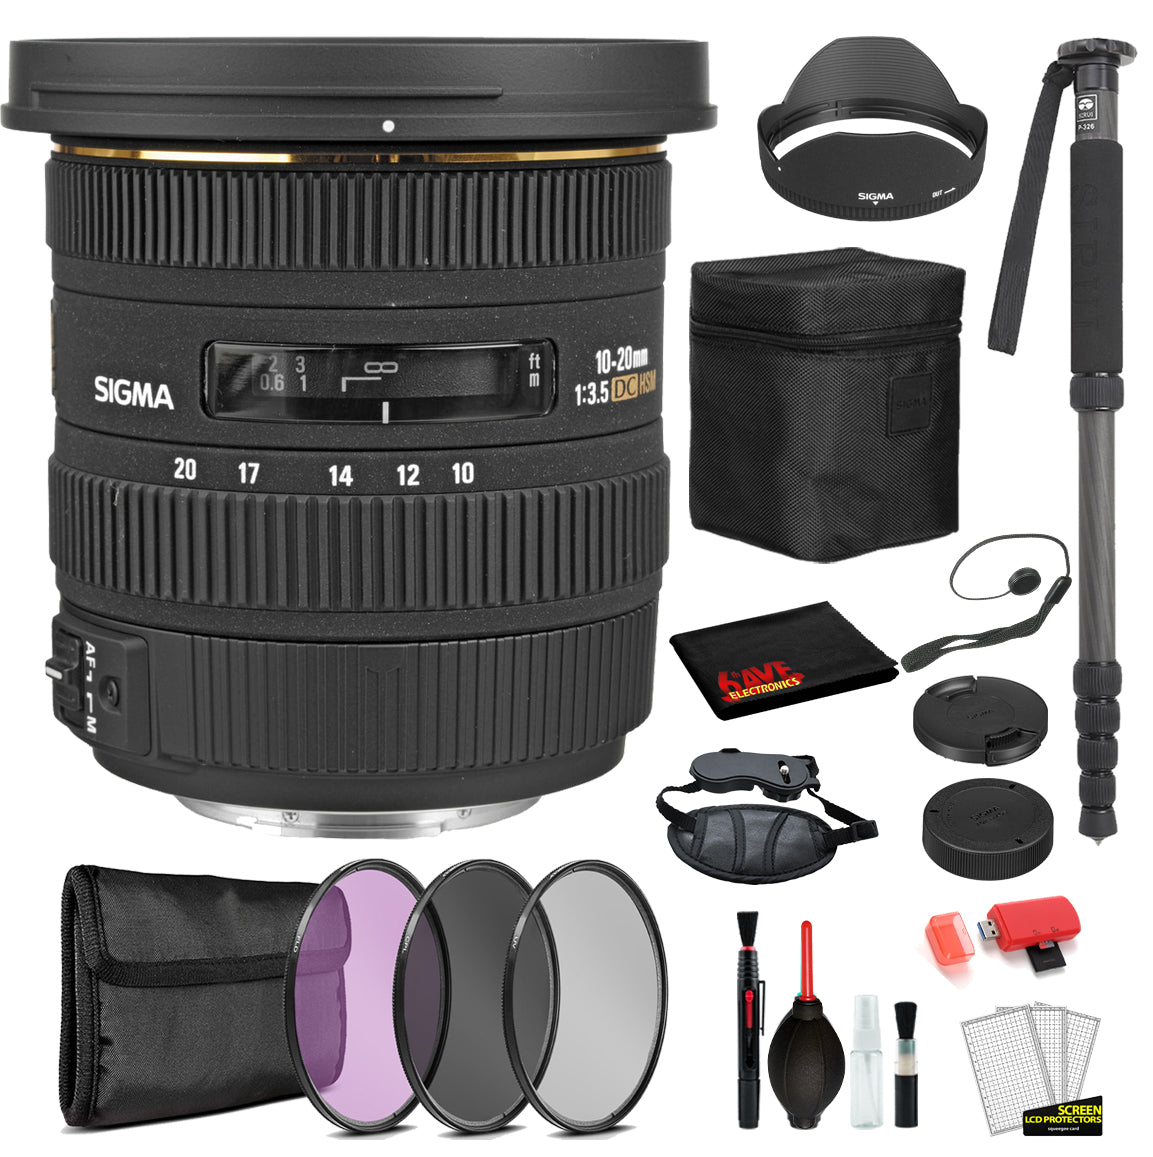 Sigma 10-20mm f/3.5 EX DC HSM Lens for Nikon F with Bundle Includes: Pro Series Monopod, 3PC Filter Kit + More